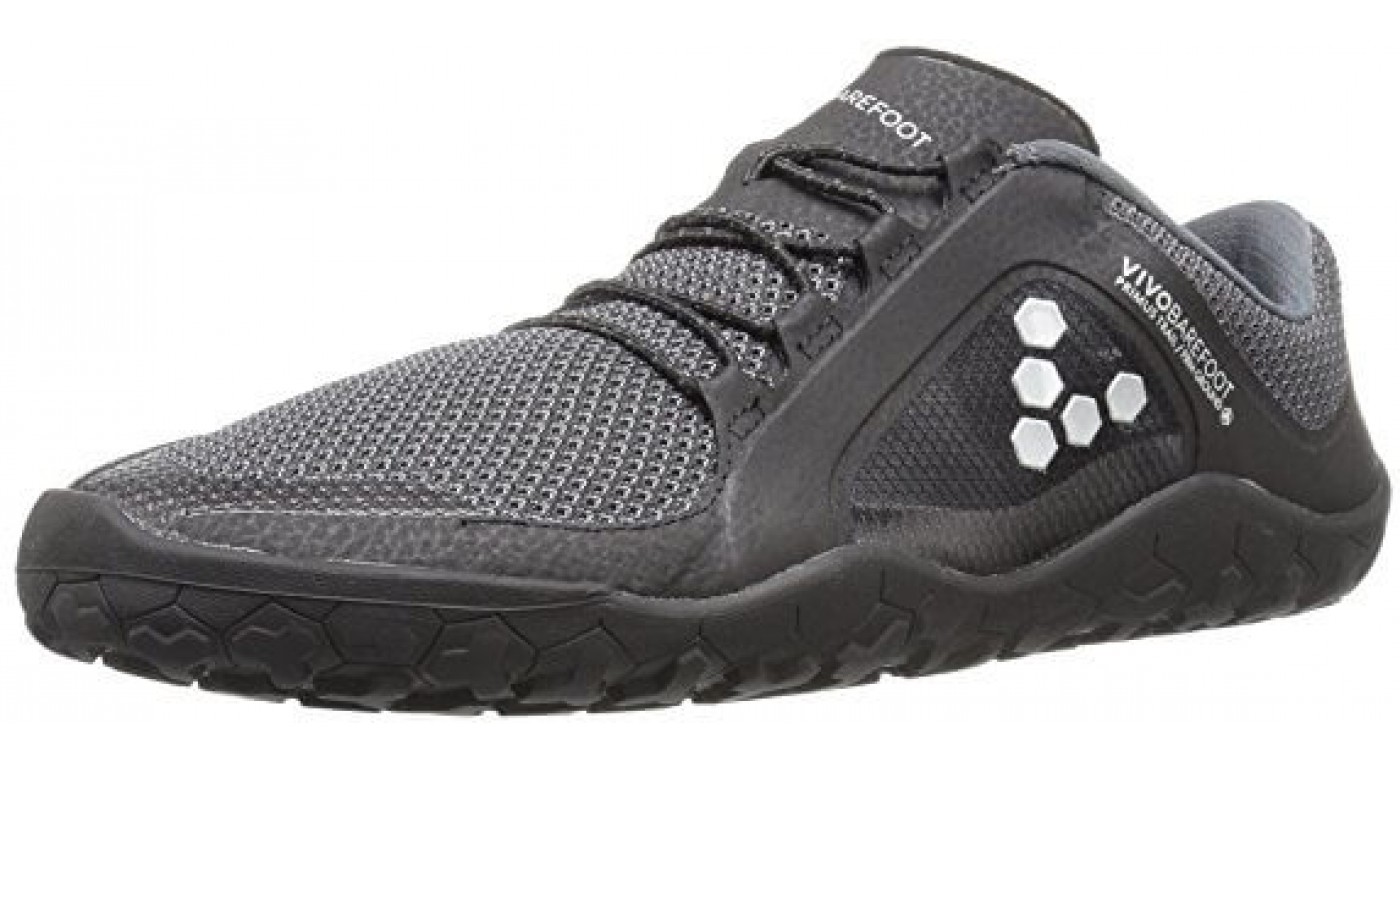 The Vivobarefoot Primus Trail FG is made with a breathable mesh to keep your foot cool